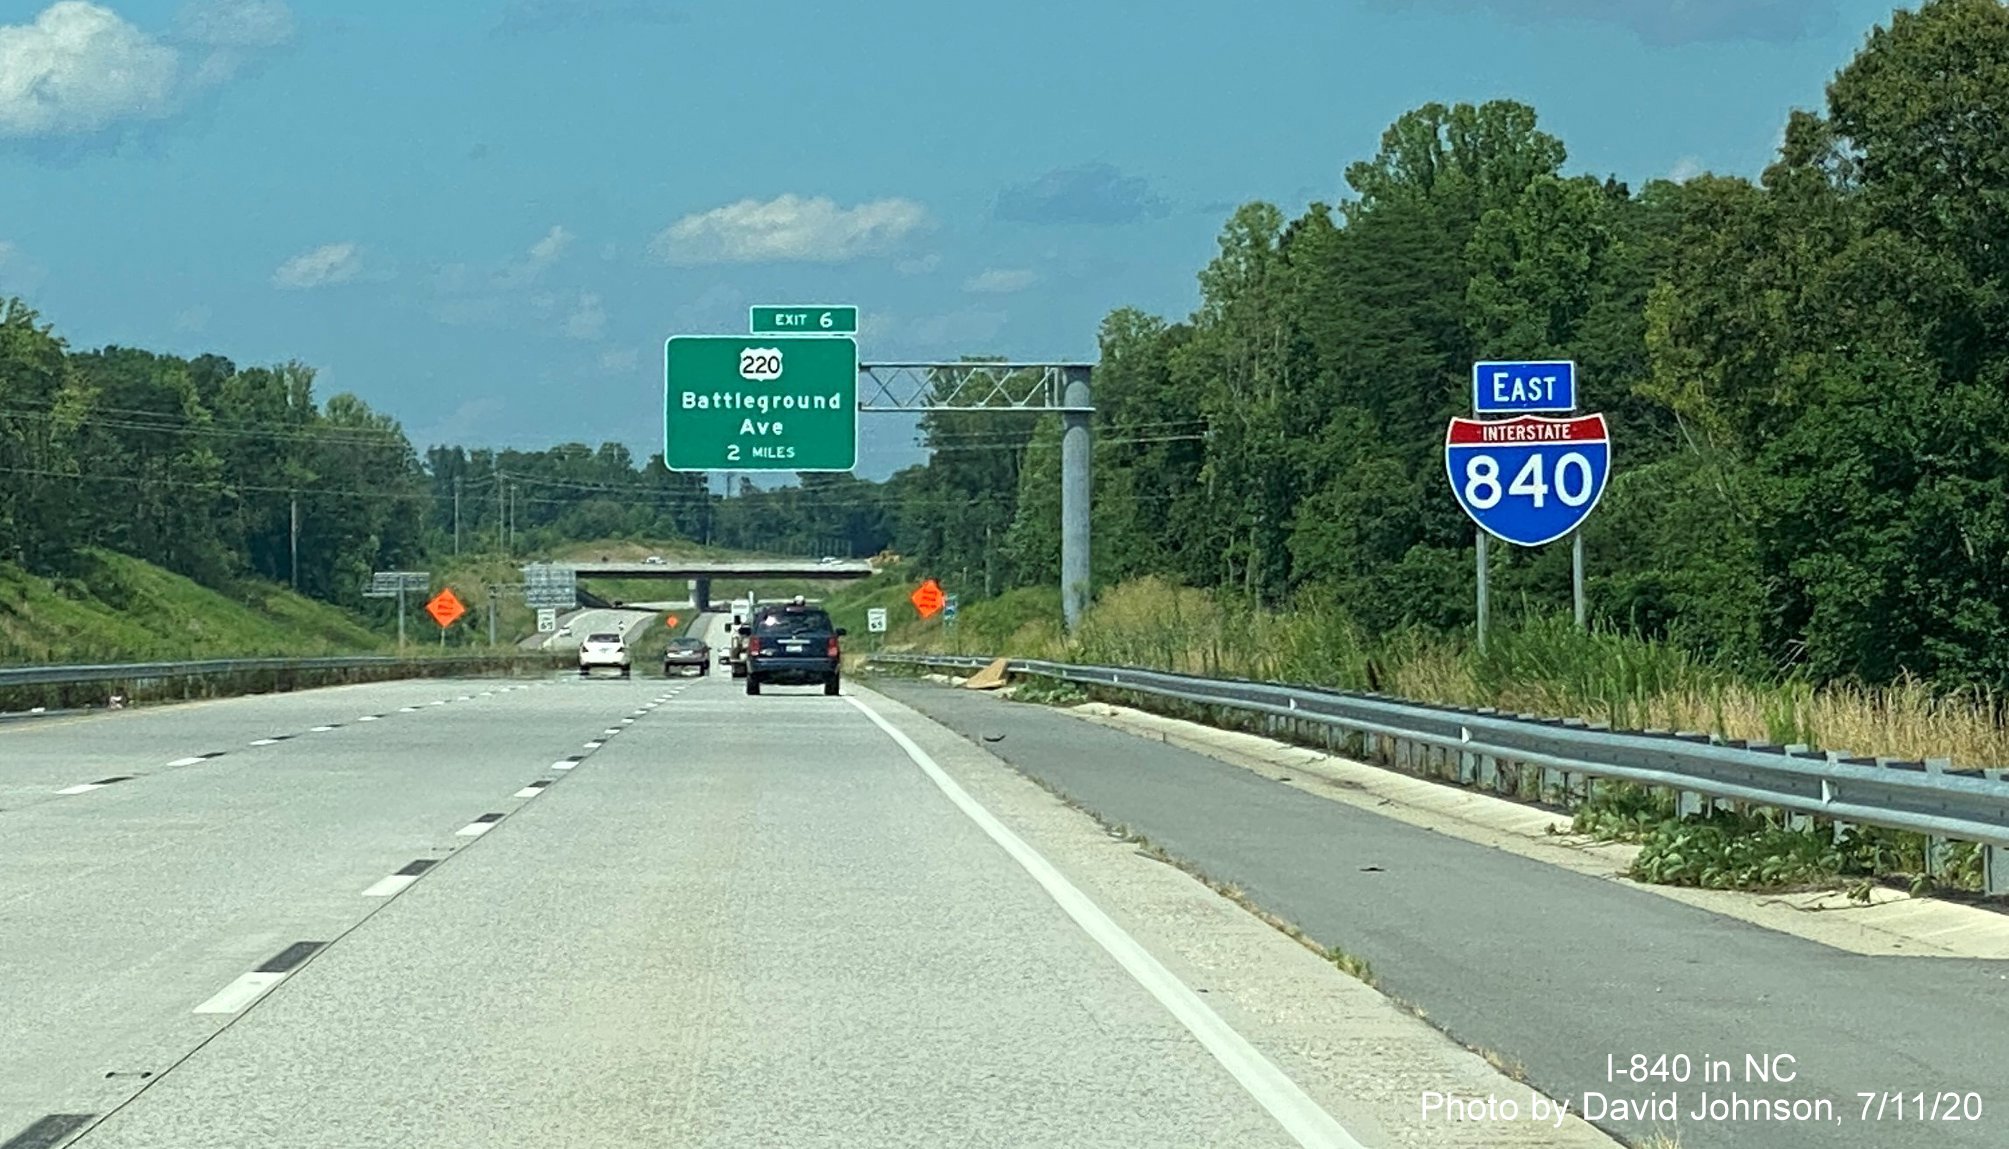 Image of East I-840 reassurance marker and 2-miles advance sign for US 220 exit on I-840 Greensboro Loop, by David Johnson July 2020